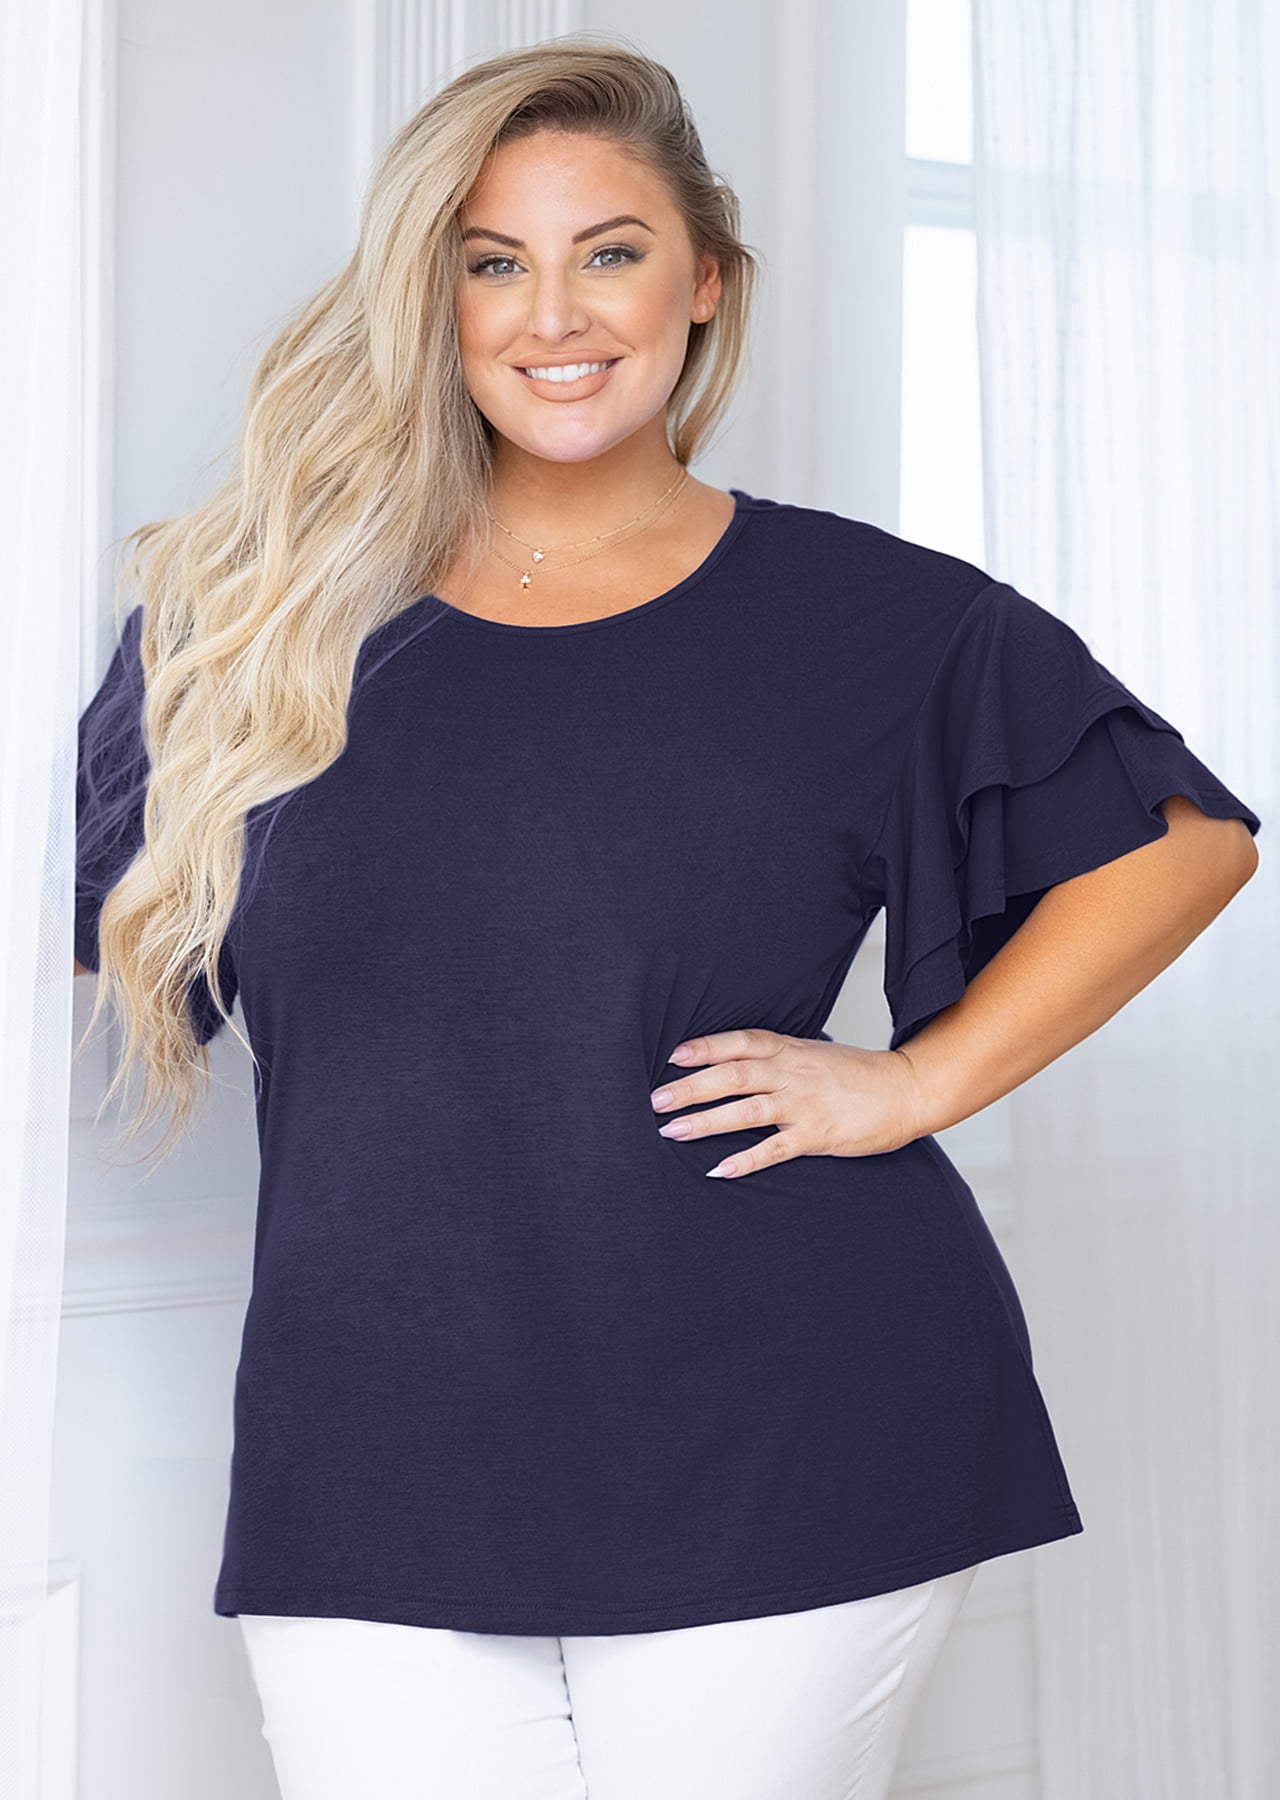 AusLook Plus Size Summer Clothes For Women Blue Grey 2X Tunic